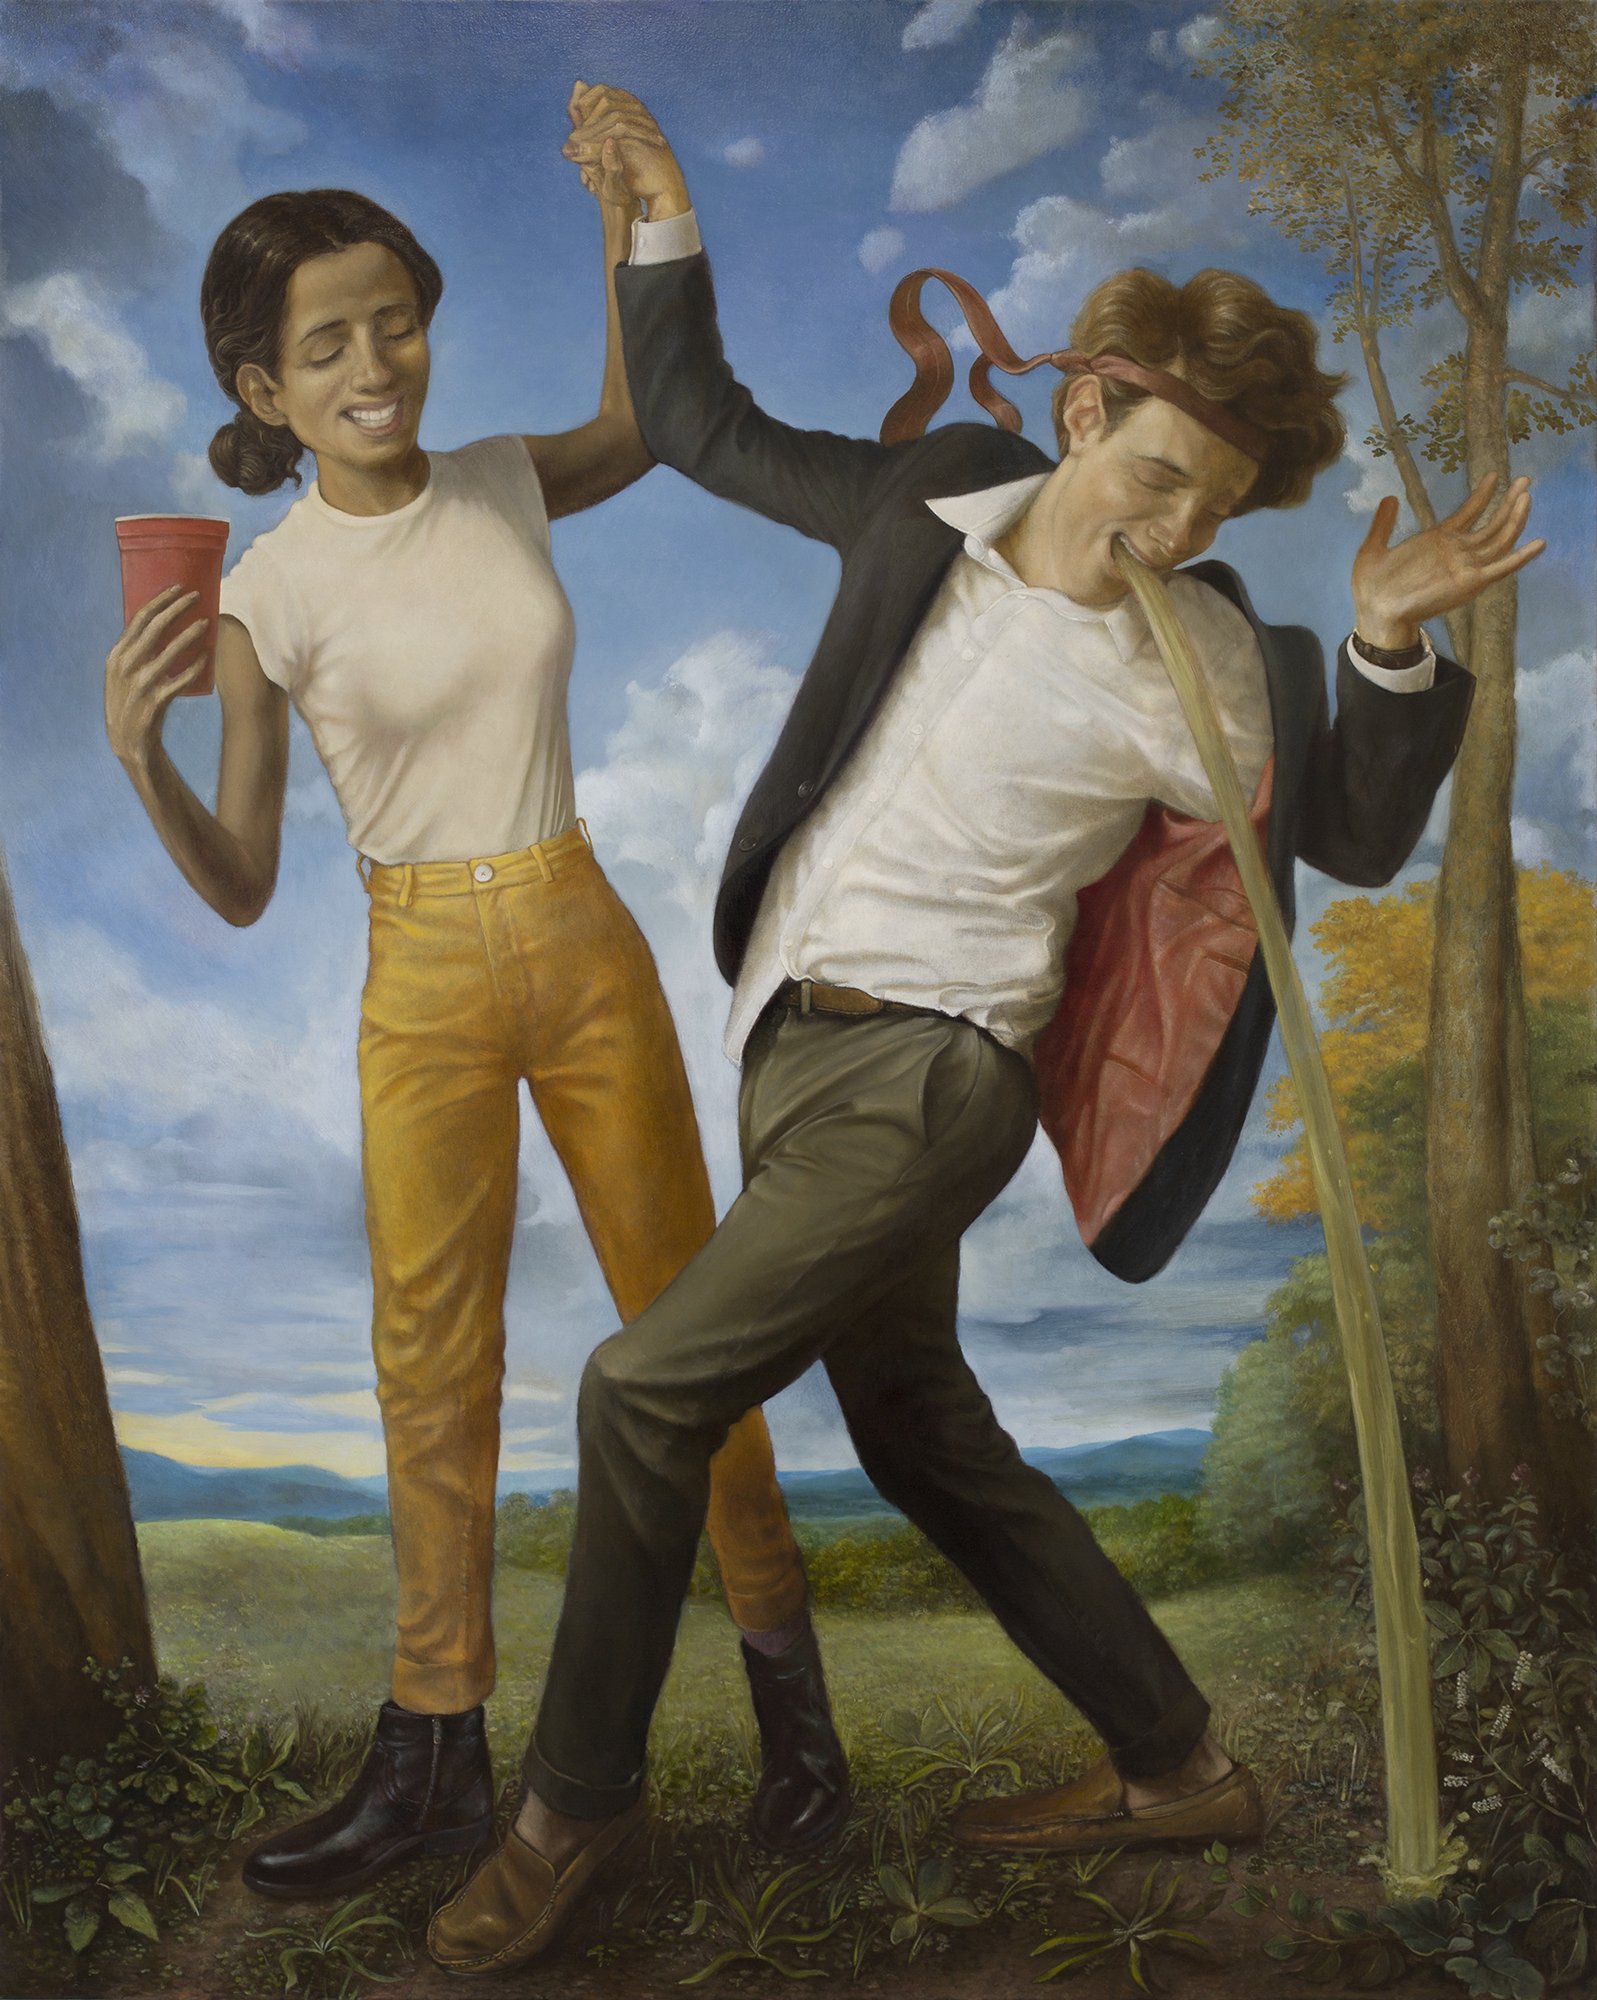    Keep Dancing Stupid,  2021  Oil on canvas, 60 x 48 inches 